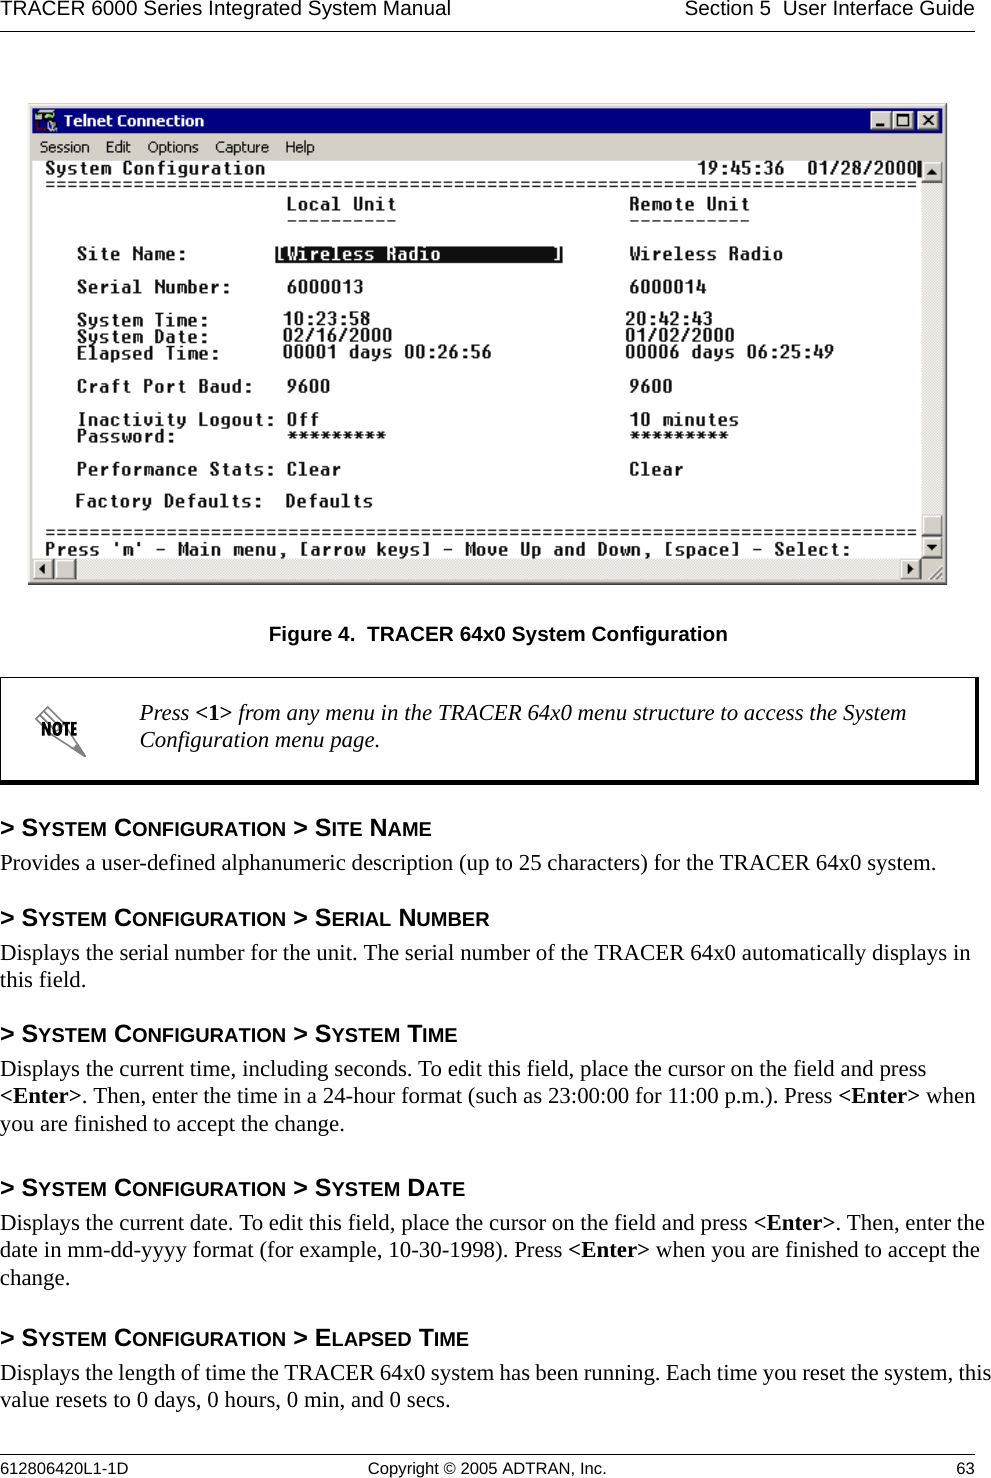 TRACER 6000 Series Integrated System Manual Section 5  User Interface Guide612806420L1-1D Copyright © 2005 ADTRAN, Inc. 63Figure 4.  TRACER 64x0 System Configuration&gt; SYSTEM CONFIGURATION &gt; SITE NAMEProvides a user-defined alphanumeric description (up to 25 characters) for the TRACER 64x0 system.&gt; SYSTEM CONFIGURATION &gt; SERIAL NUMBERDisplays the serial number for the unit. The serial number of the TRACER 64x0 automatically displays in this field.&gt; SYSTEM CONFIGURATION &gt; SYSTEM TIMEDisplays the current time, including seconds. To edit this field, place the cursor on the field and press &lt;Enter&gt;. Then, enter the time in a 24-hour format (such as 23:00:00 for 11:00 p.m.). Press &lt;Enter&gt; when you are finished to accept the change. &gt; SYSTEM CONFIGURATION &gt; SYSTEM DATEDisplays the current date. To edit this field, place the cursor on the field and press &lt;Enter&gt;. Then, enter the date in mm-dd-yyyy format (for example, 10-30-1998). Press &lt;Enter&gt; when you are finished to accept the change.&gt; SYSTEM CONFIGURATION &gt; ELAPSED TIMEDisplays the length of time the TRACER 64x0 system has been running. Each time you reset the system, this value resets to 0 days, 0 hours, 0 min, and 0 secs.Press &lt;1&gt; from any menu in the TRACER 64x0 menu structure to access the System Configuration menu page.